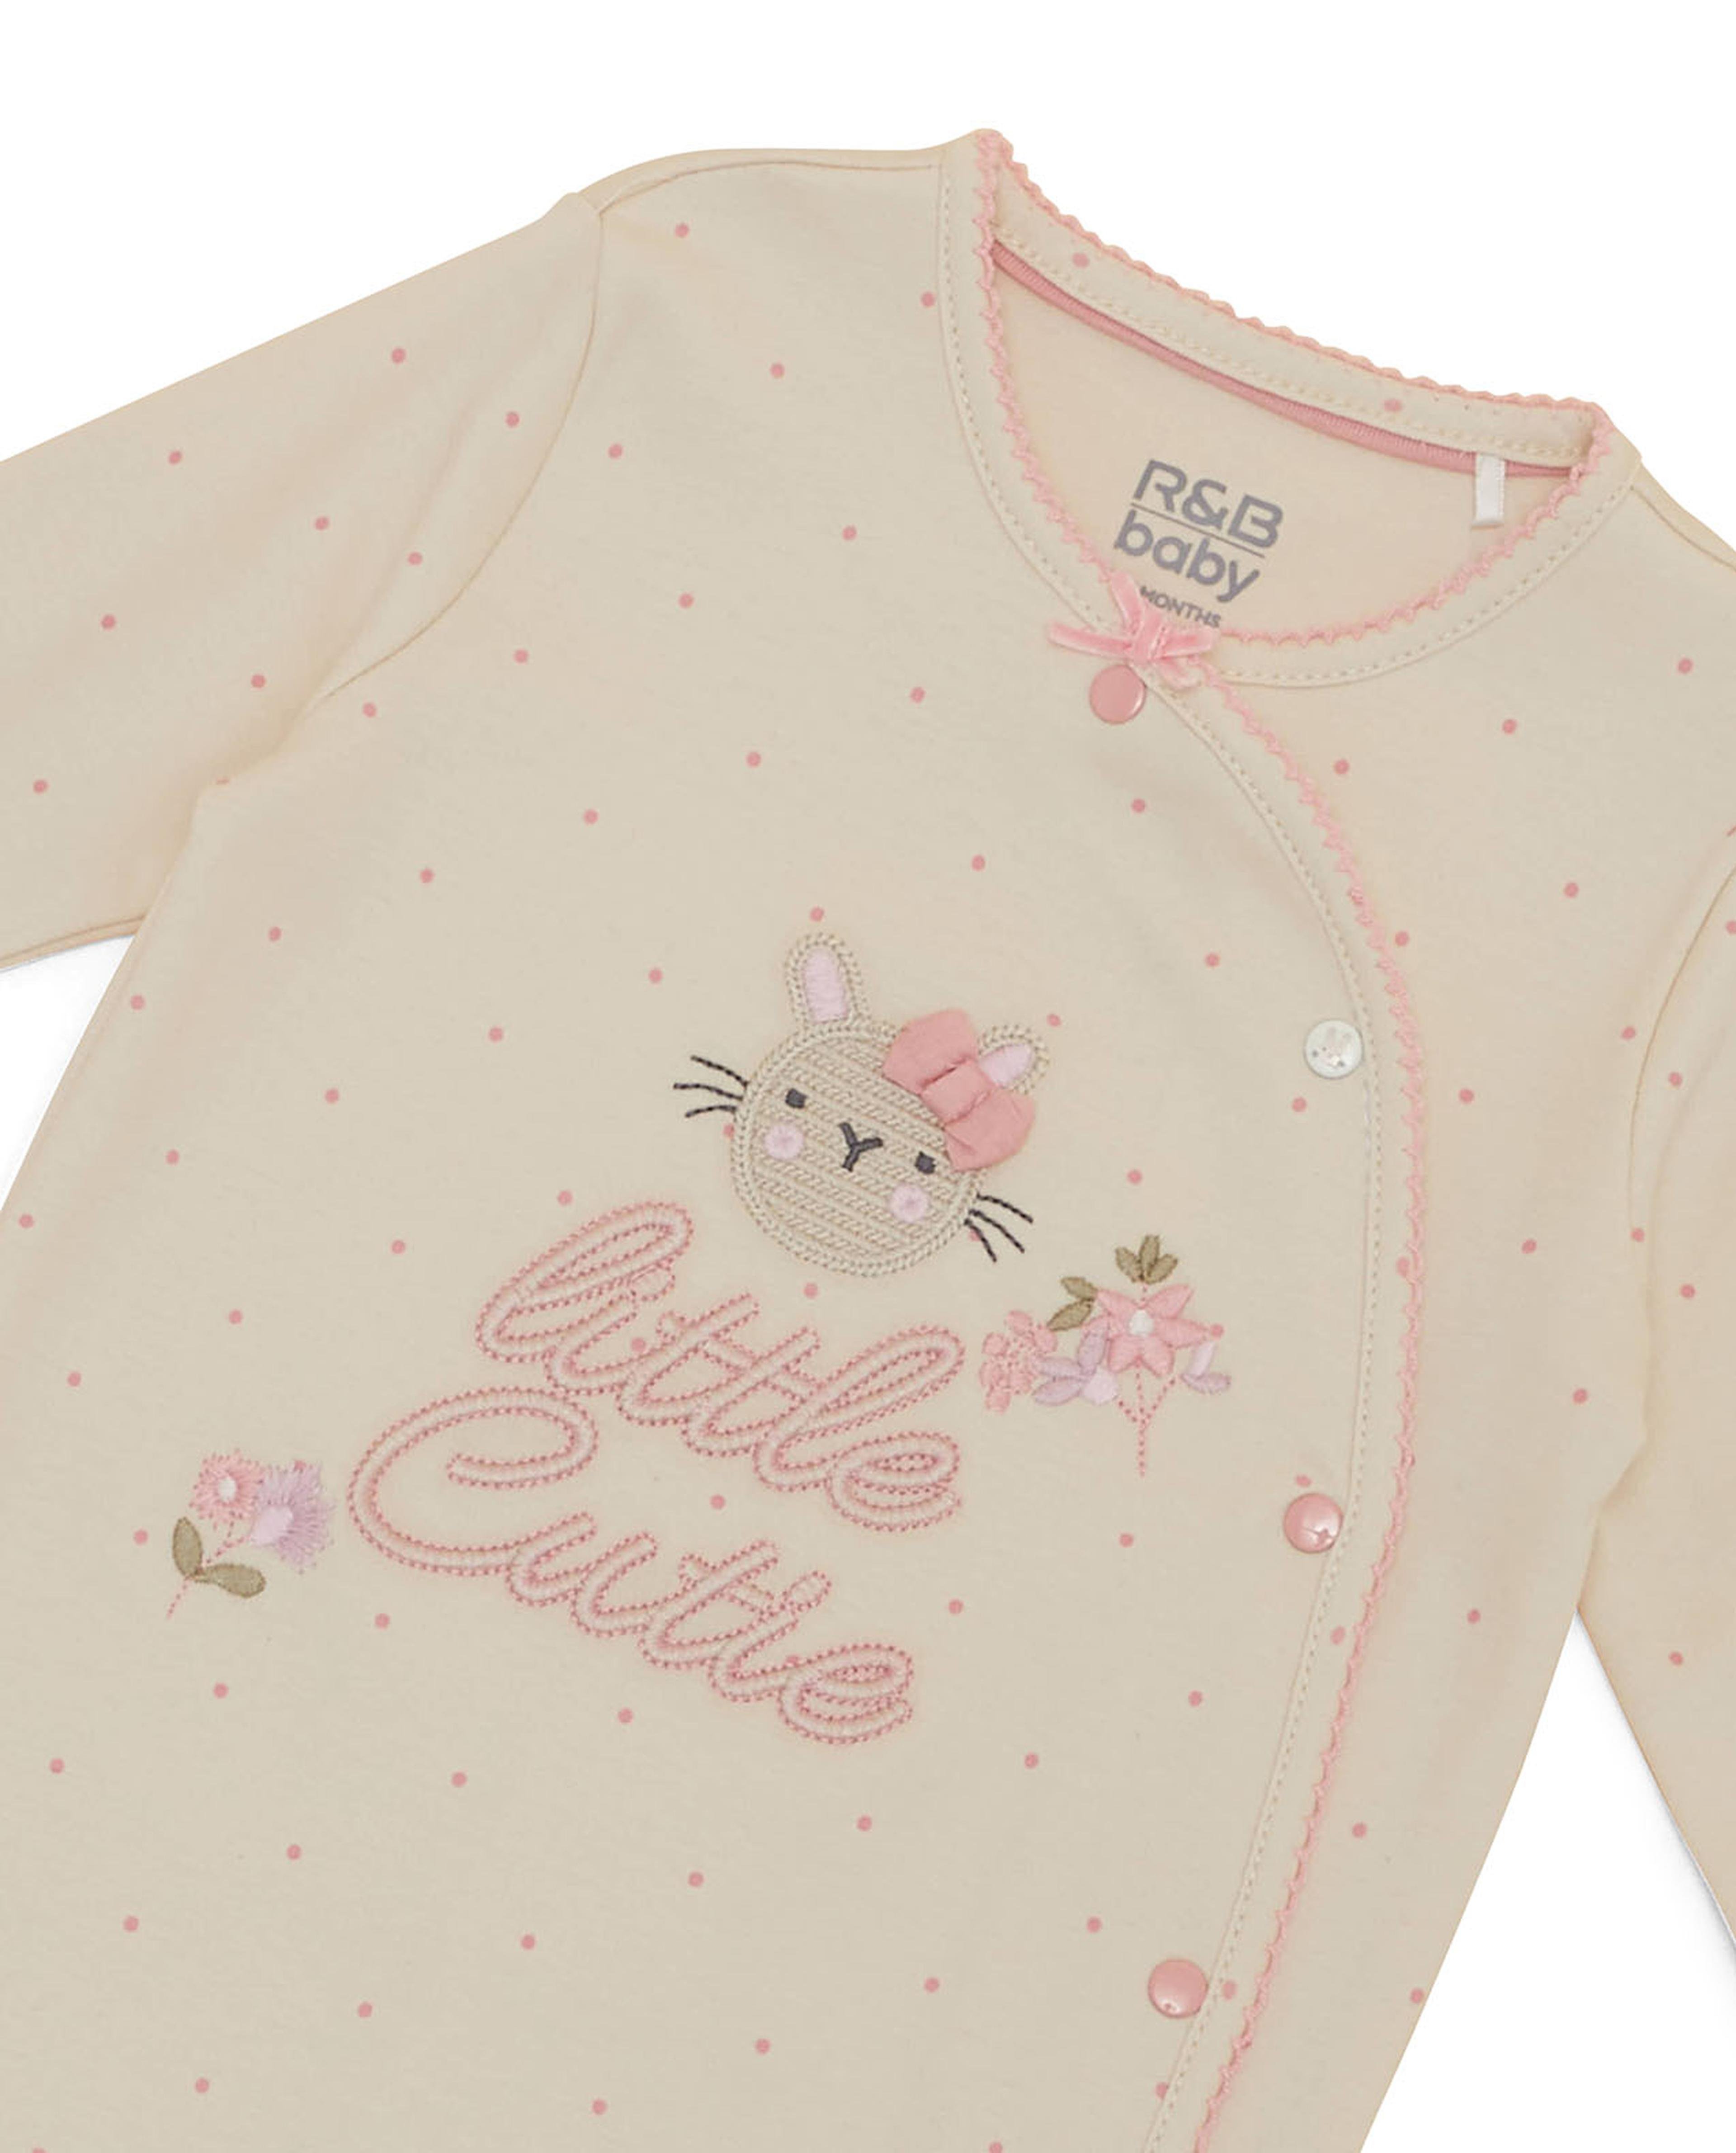 Embroidered Sleepsuit with Snap Button Closure